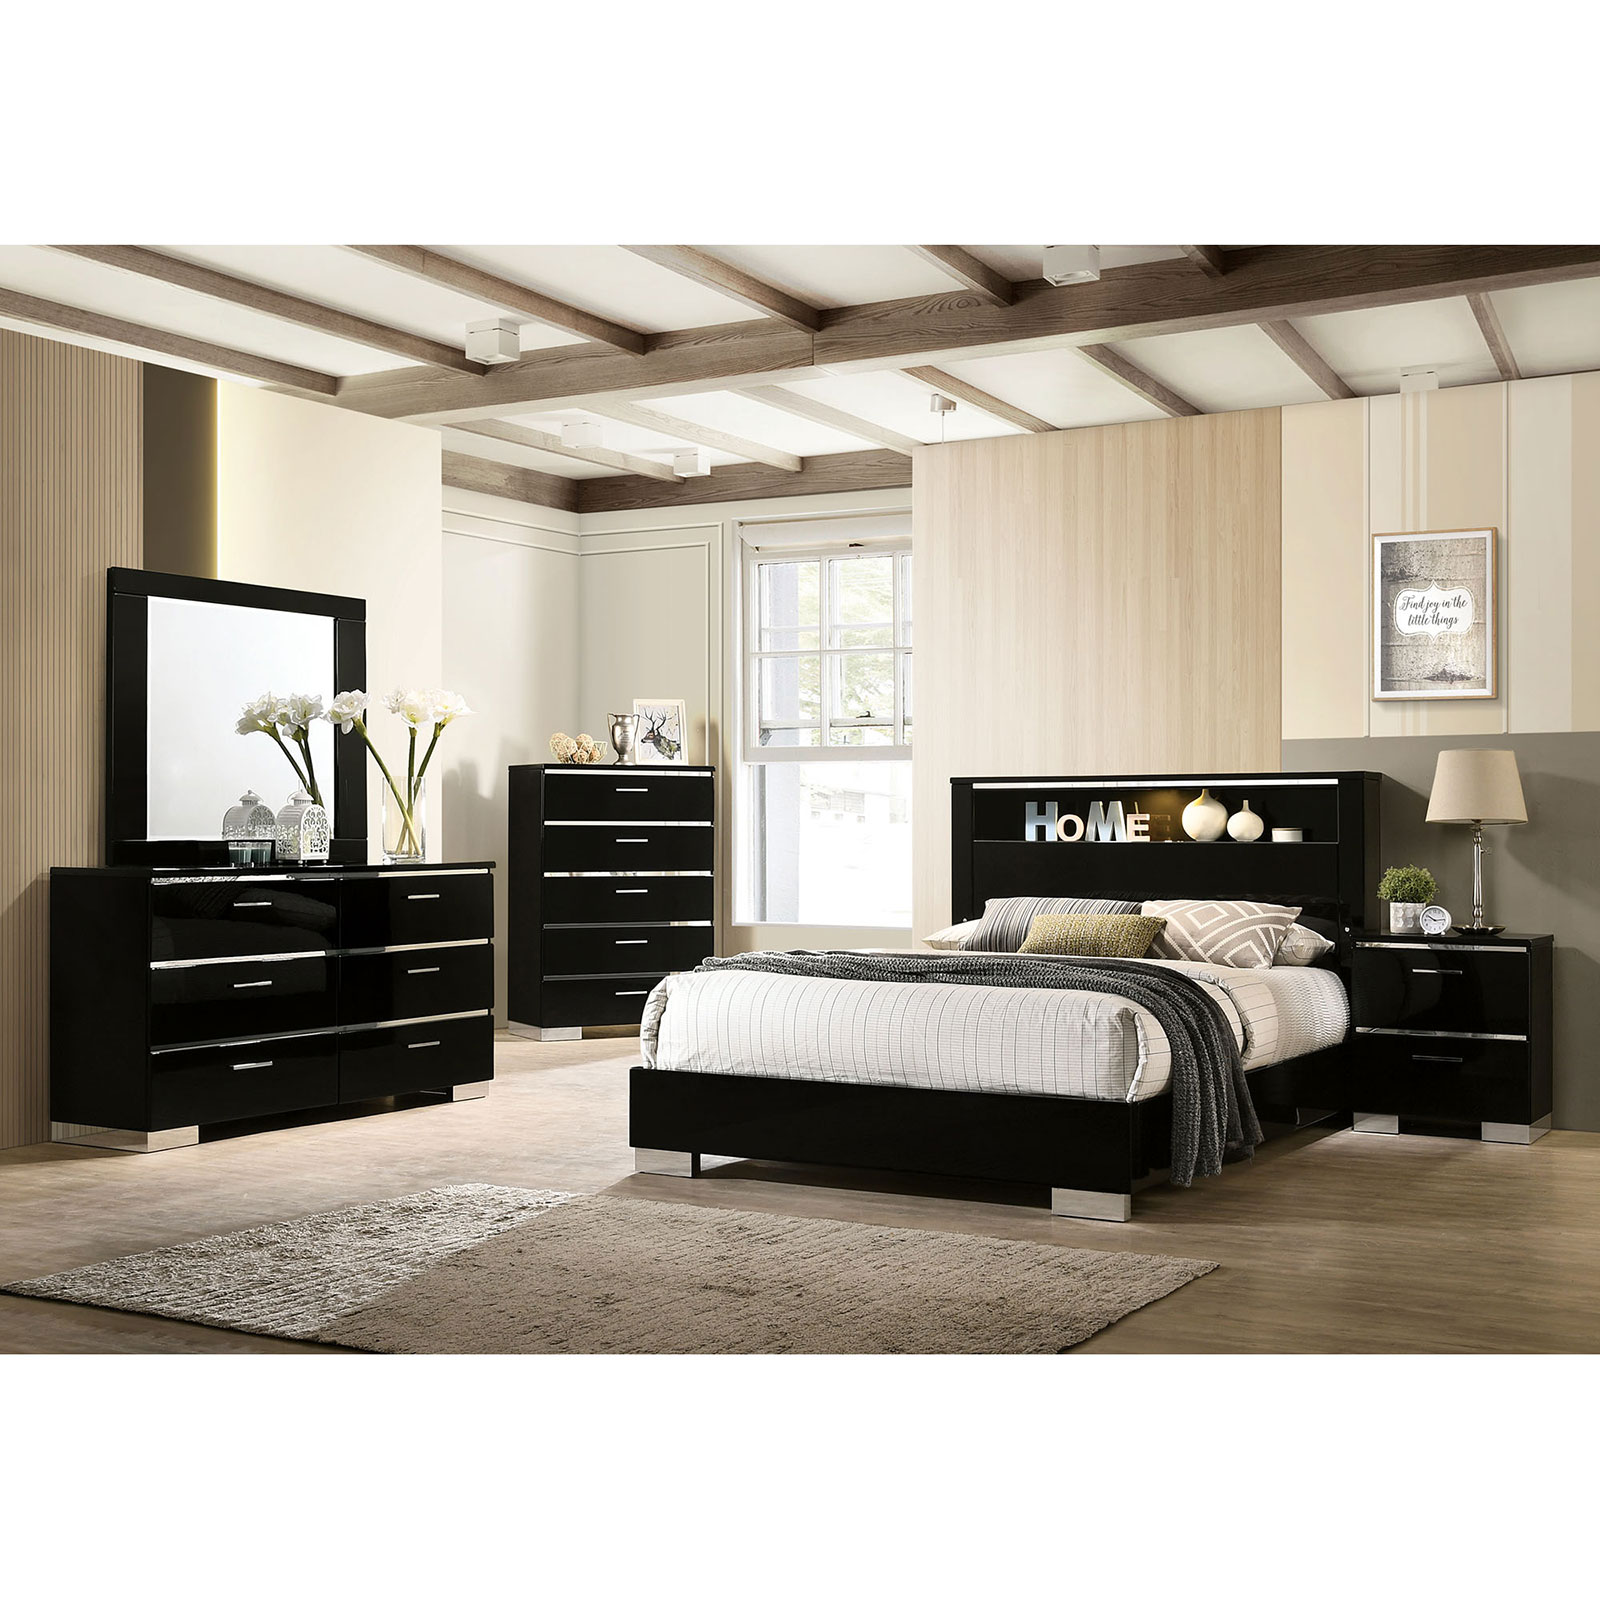 High Gloss Lacquer Coating Queen Size, Black Dresser Set With Mirror